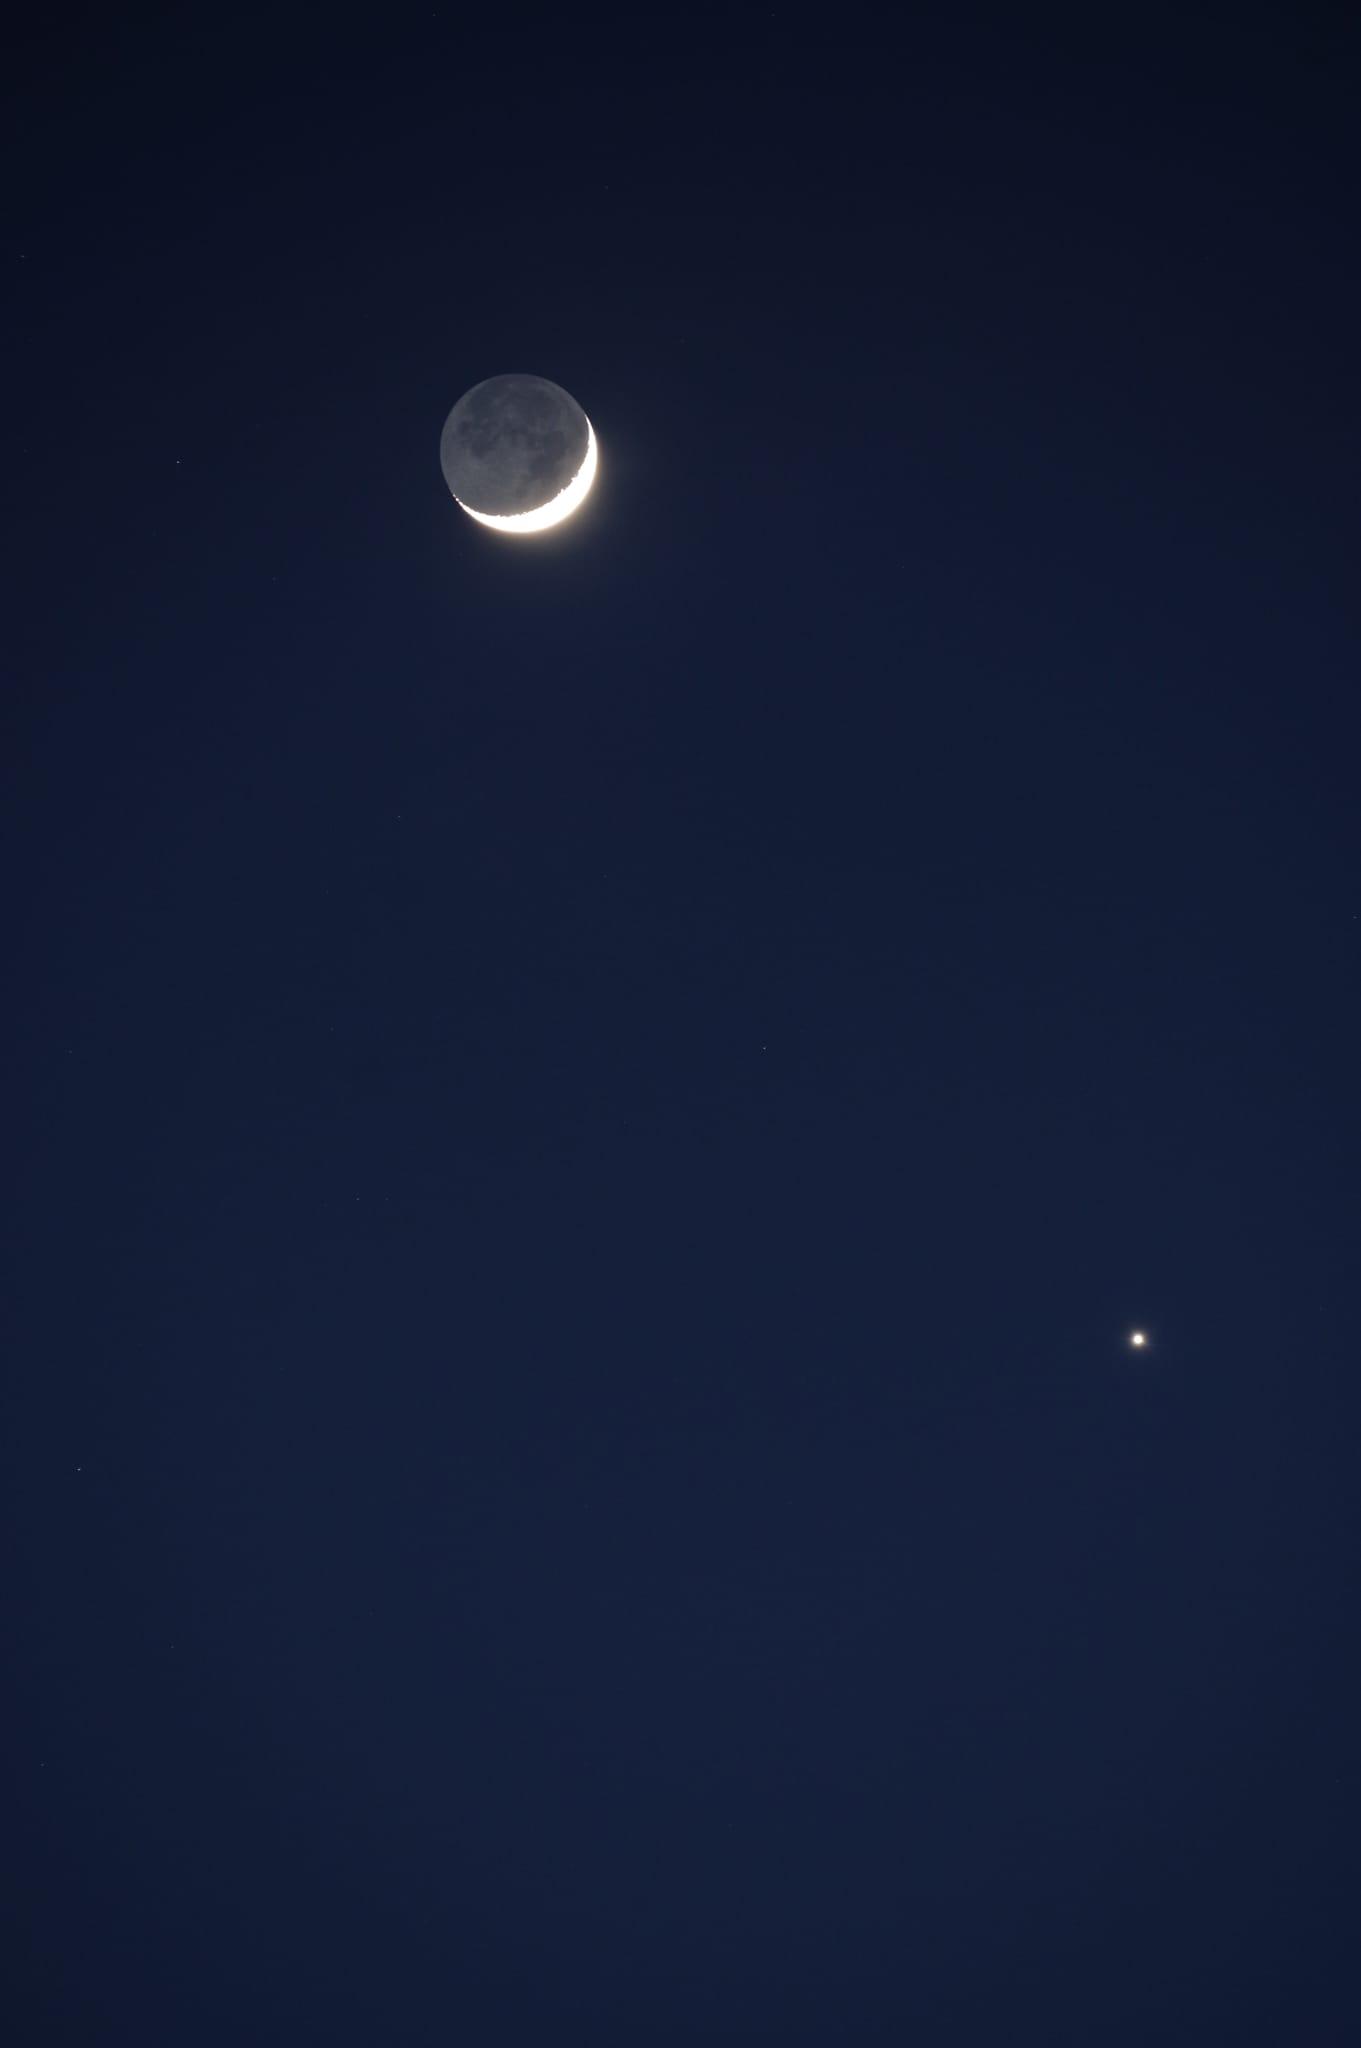 Jim-Burchell-Crescent-Moon-and-Venus-24th-March-2023-WhatsApp-Image-2023-03-24-at-20.18.30